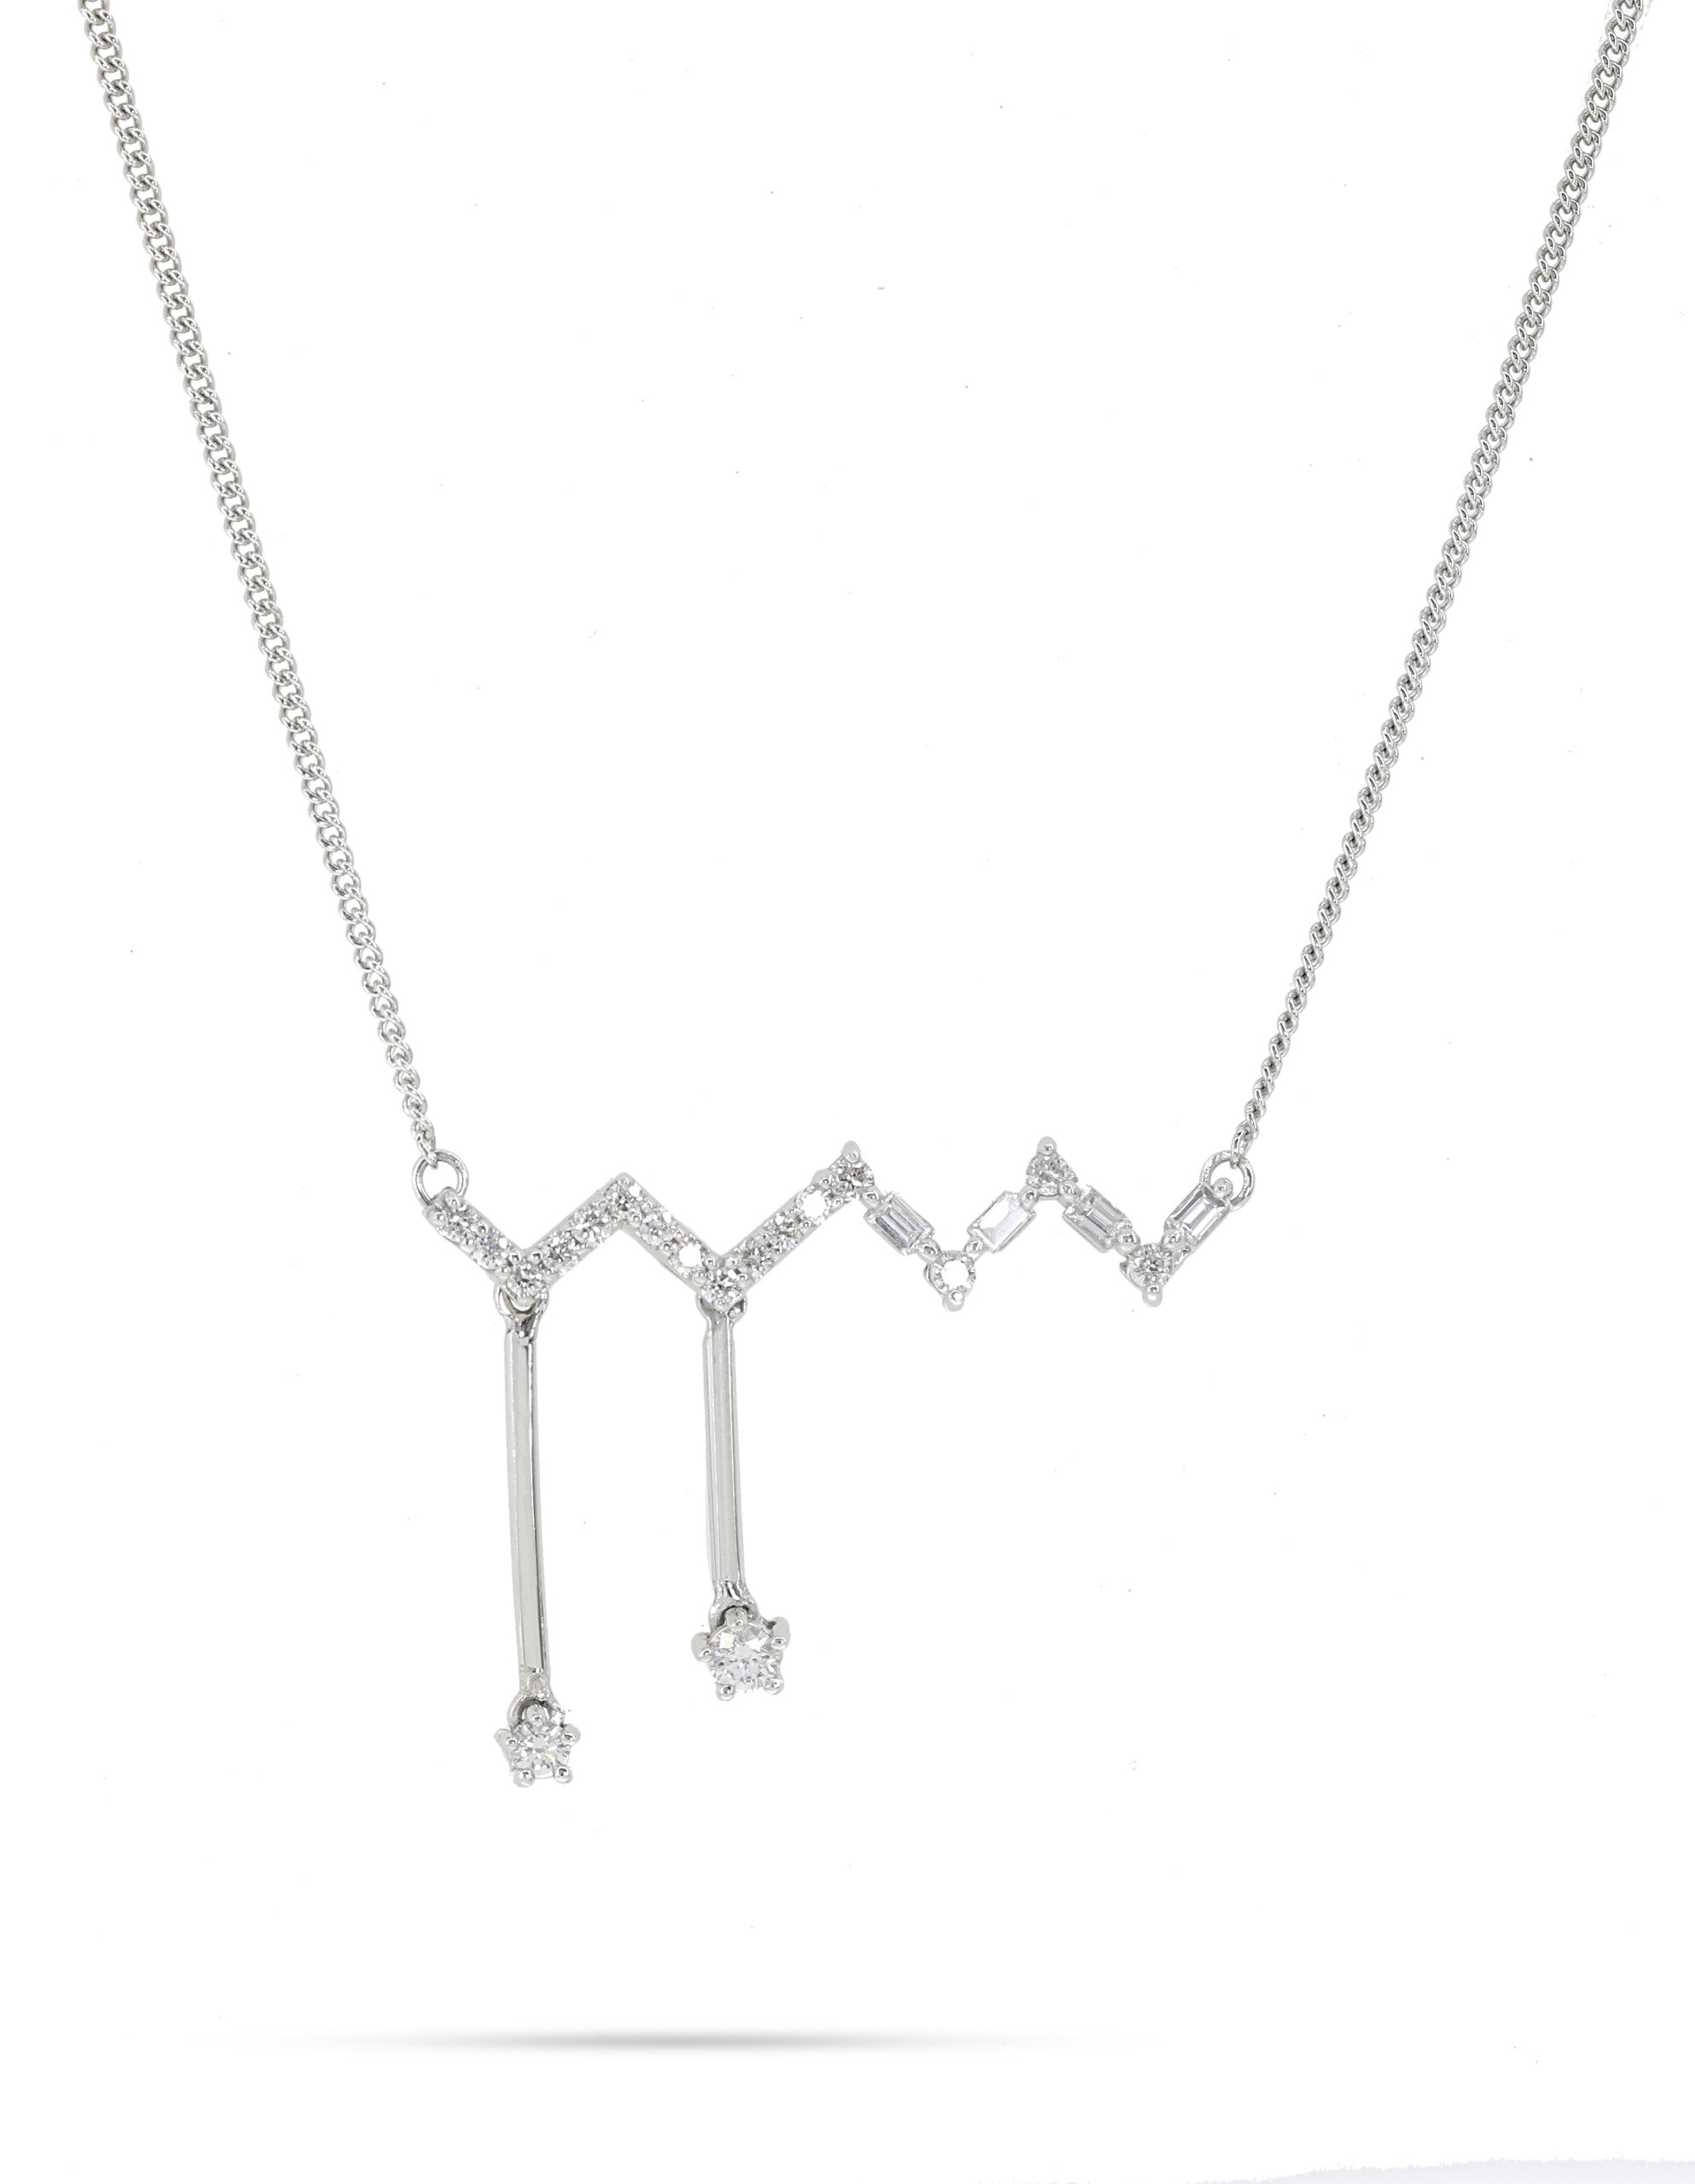 Geometrical Arrows with dangling stars necklace in White 18 K Gold - S-NE017S